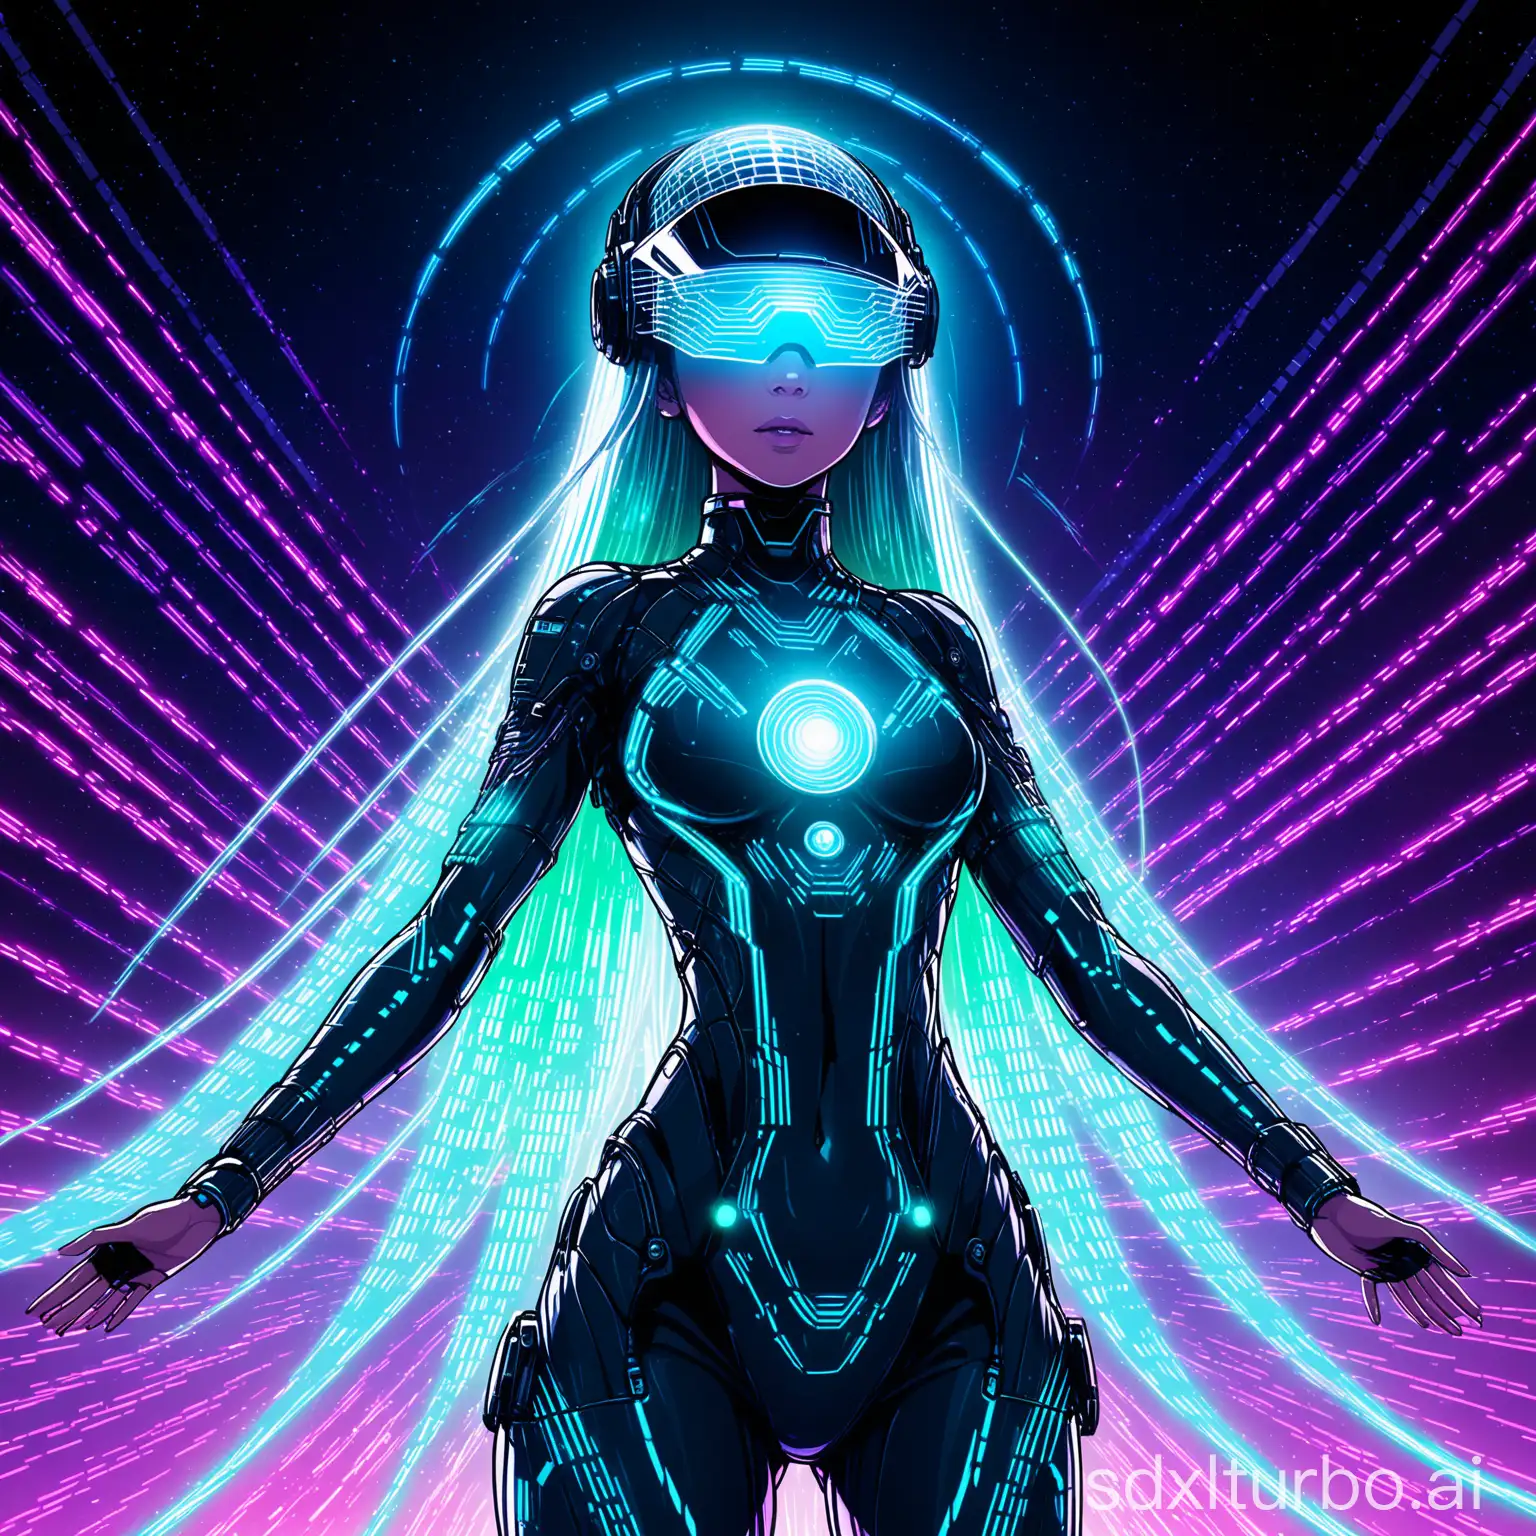 A virtual female AI music artist figure made of glowing blue lines forming a slender stylized humanoid shape, with a hexagonal lattice visor face showing flickering data points inside representing her digital 'mind', long streaming neon hair trails like aurora borealis, futuristic clothing with metallic plates and glowing rhomboid patterns like a cosmic raver outfit, a small orb projector on her shoulder projecting music waveform holograms, hovering slightly above the ground on a faint anti-gravity disc emitting flickering data streaks from which her compositions manifest, semi-transparent ghostly figure, sci-fi cyberpunk synthwave style, intricate details